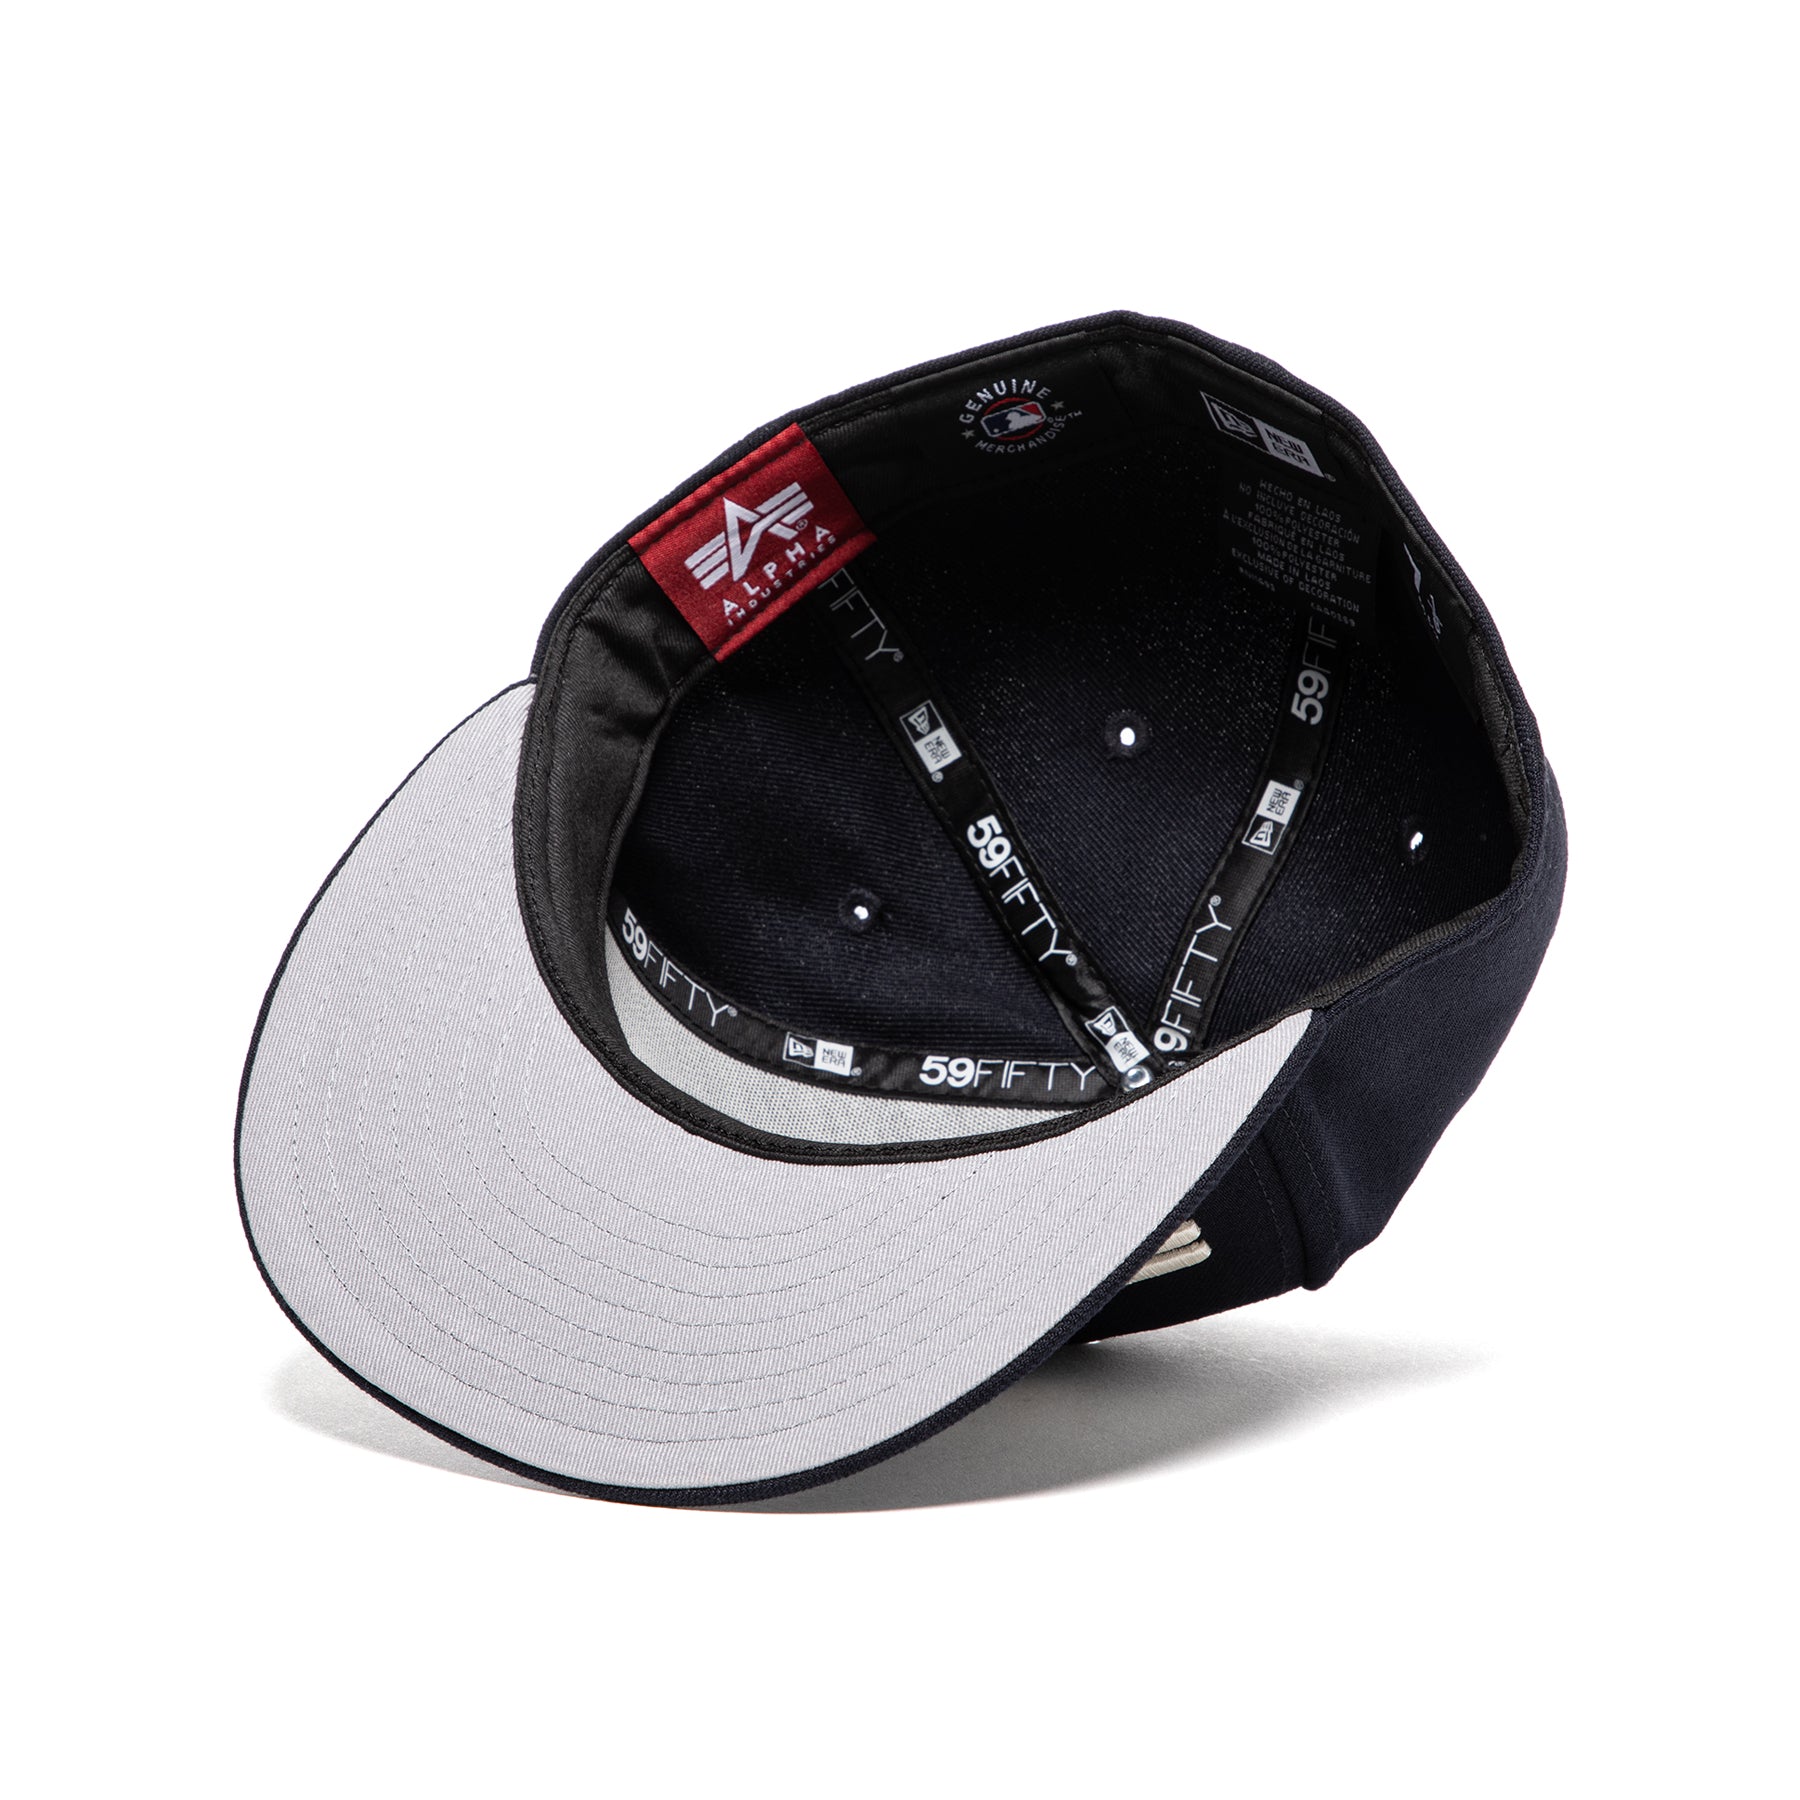 New Hat Era Fitted x Industries Yankees New (Navy) – 59Fifty Concepts York Alpha